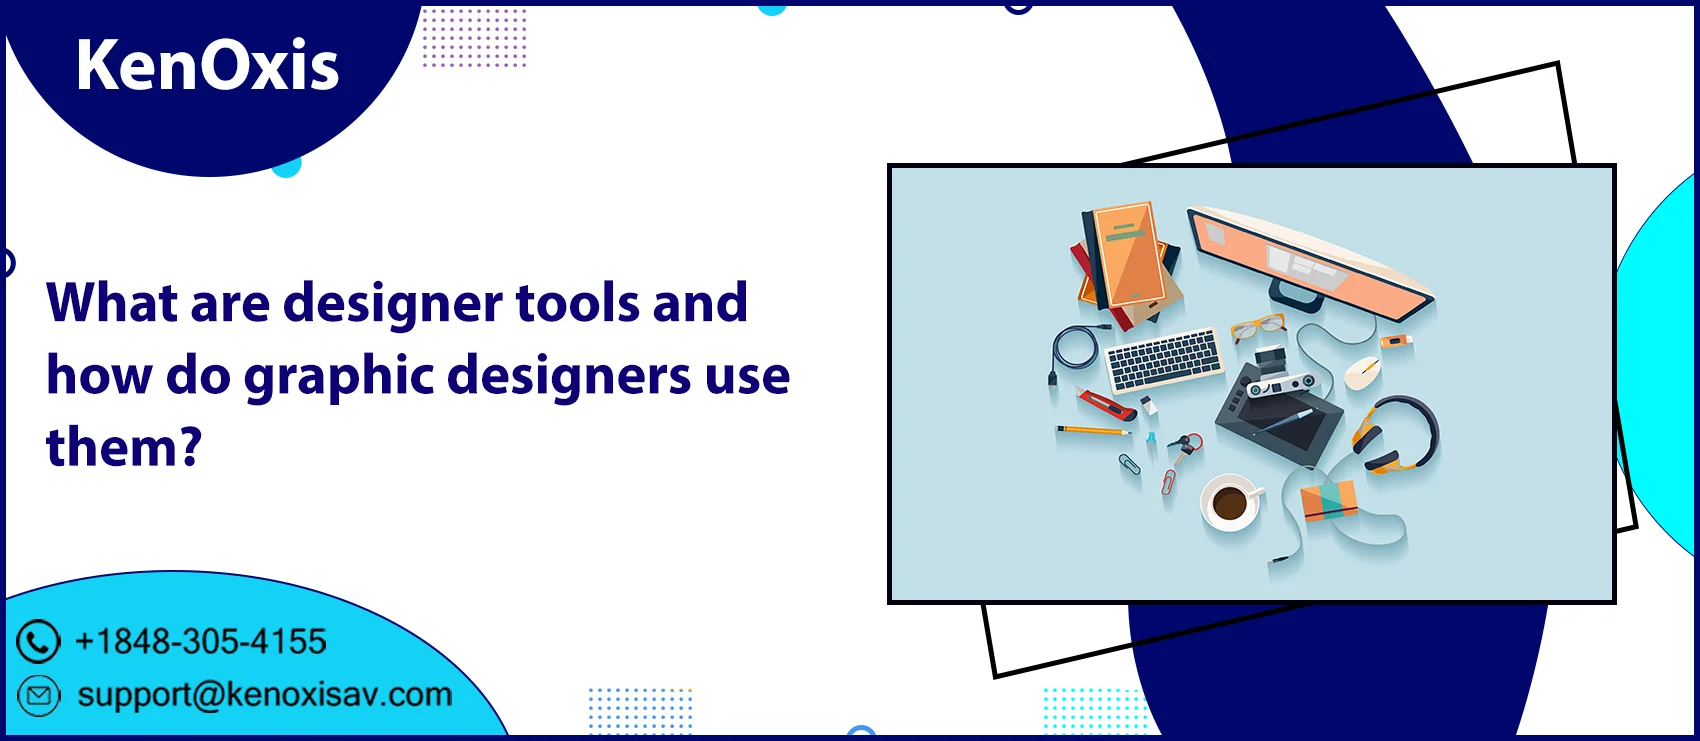 What are designer tools and how do graphic designers use them?